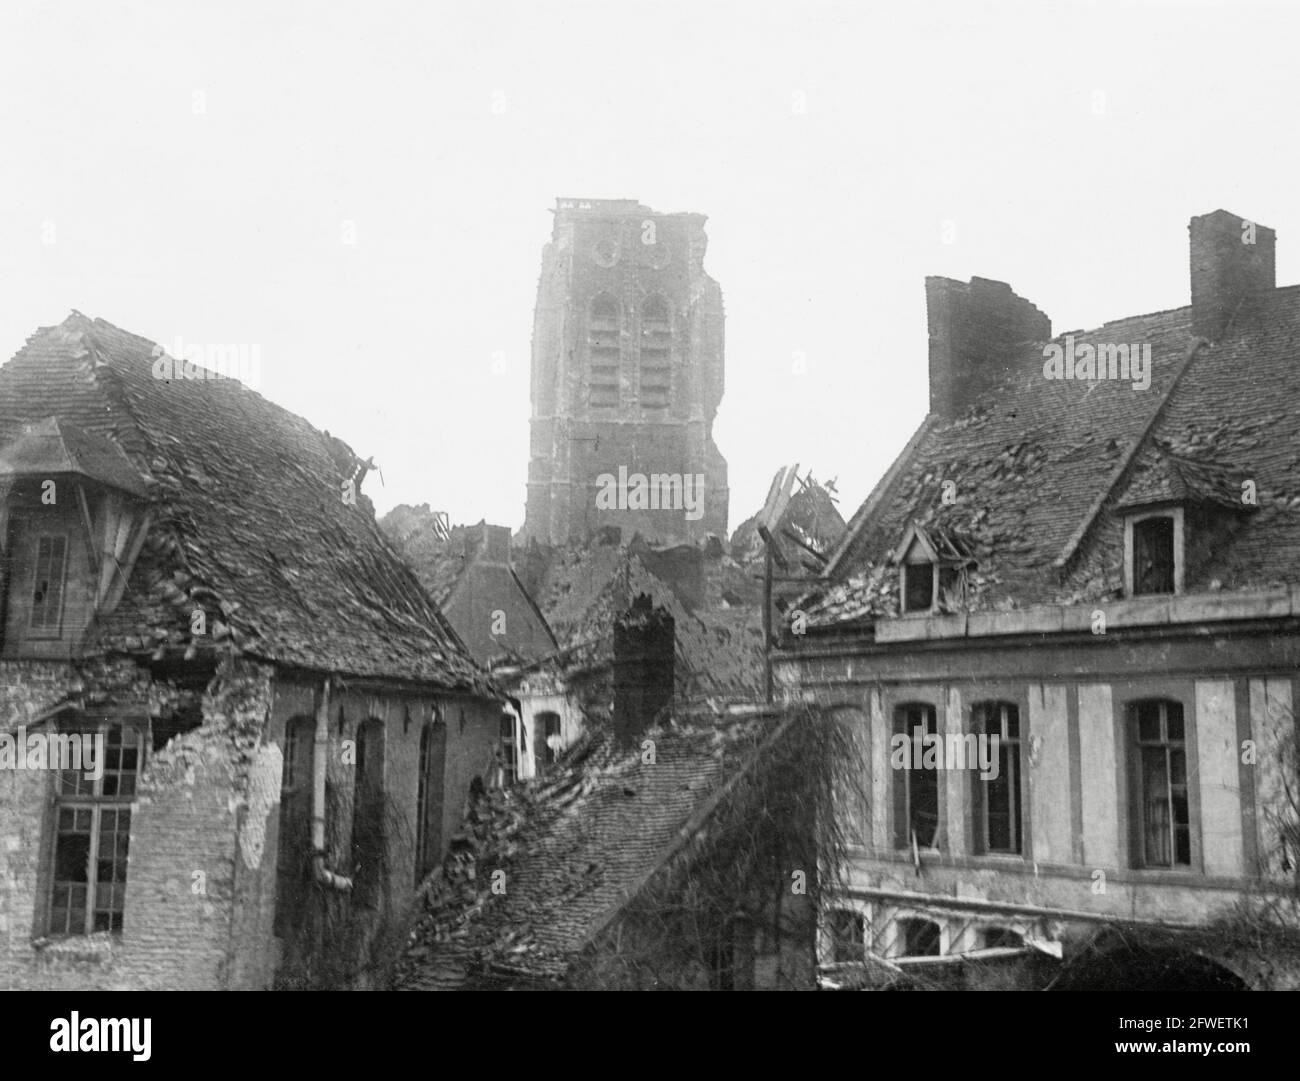 World War One, WWI, Western Front - The damaged church tower in Bethune, Pas-de-Calais Department, Northern France Stock Photo